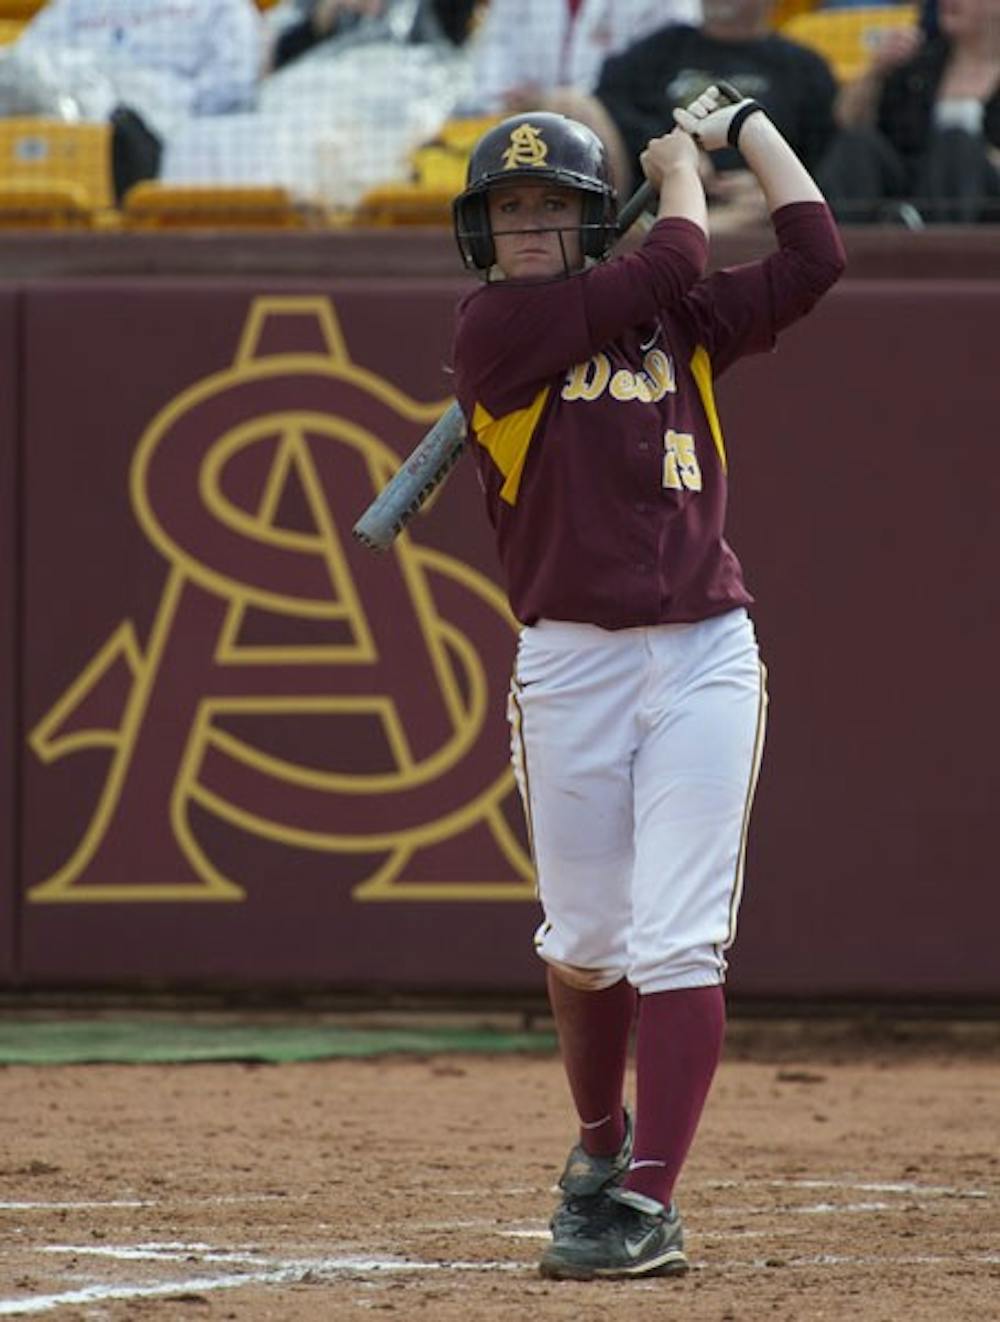 FOLLOW THROUGH: Junior catcher Lacy Goodman takes a practice swing during a game at Farrington Stadium. ASU will be hosting the Wilson/DeMarini Invitational this weekend in Tempe. (Photo by Michael Arellano)